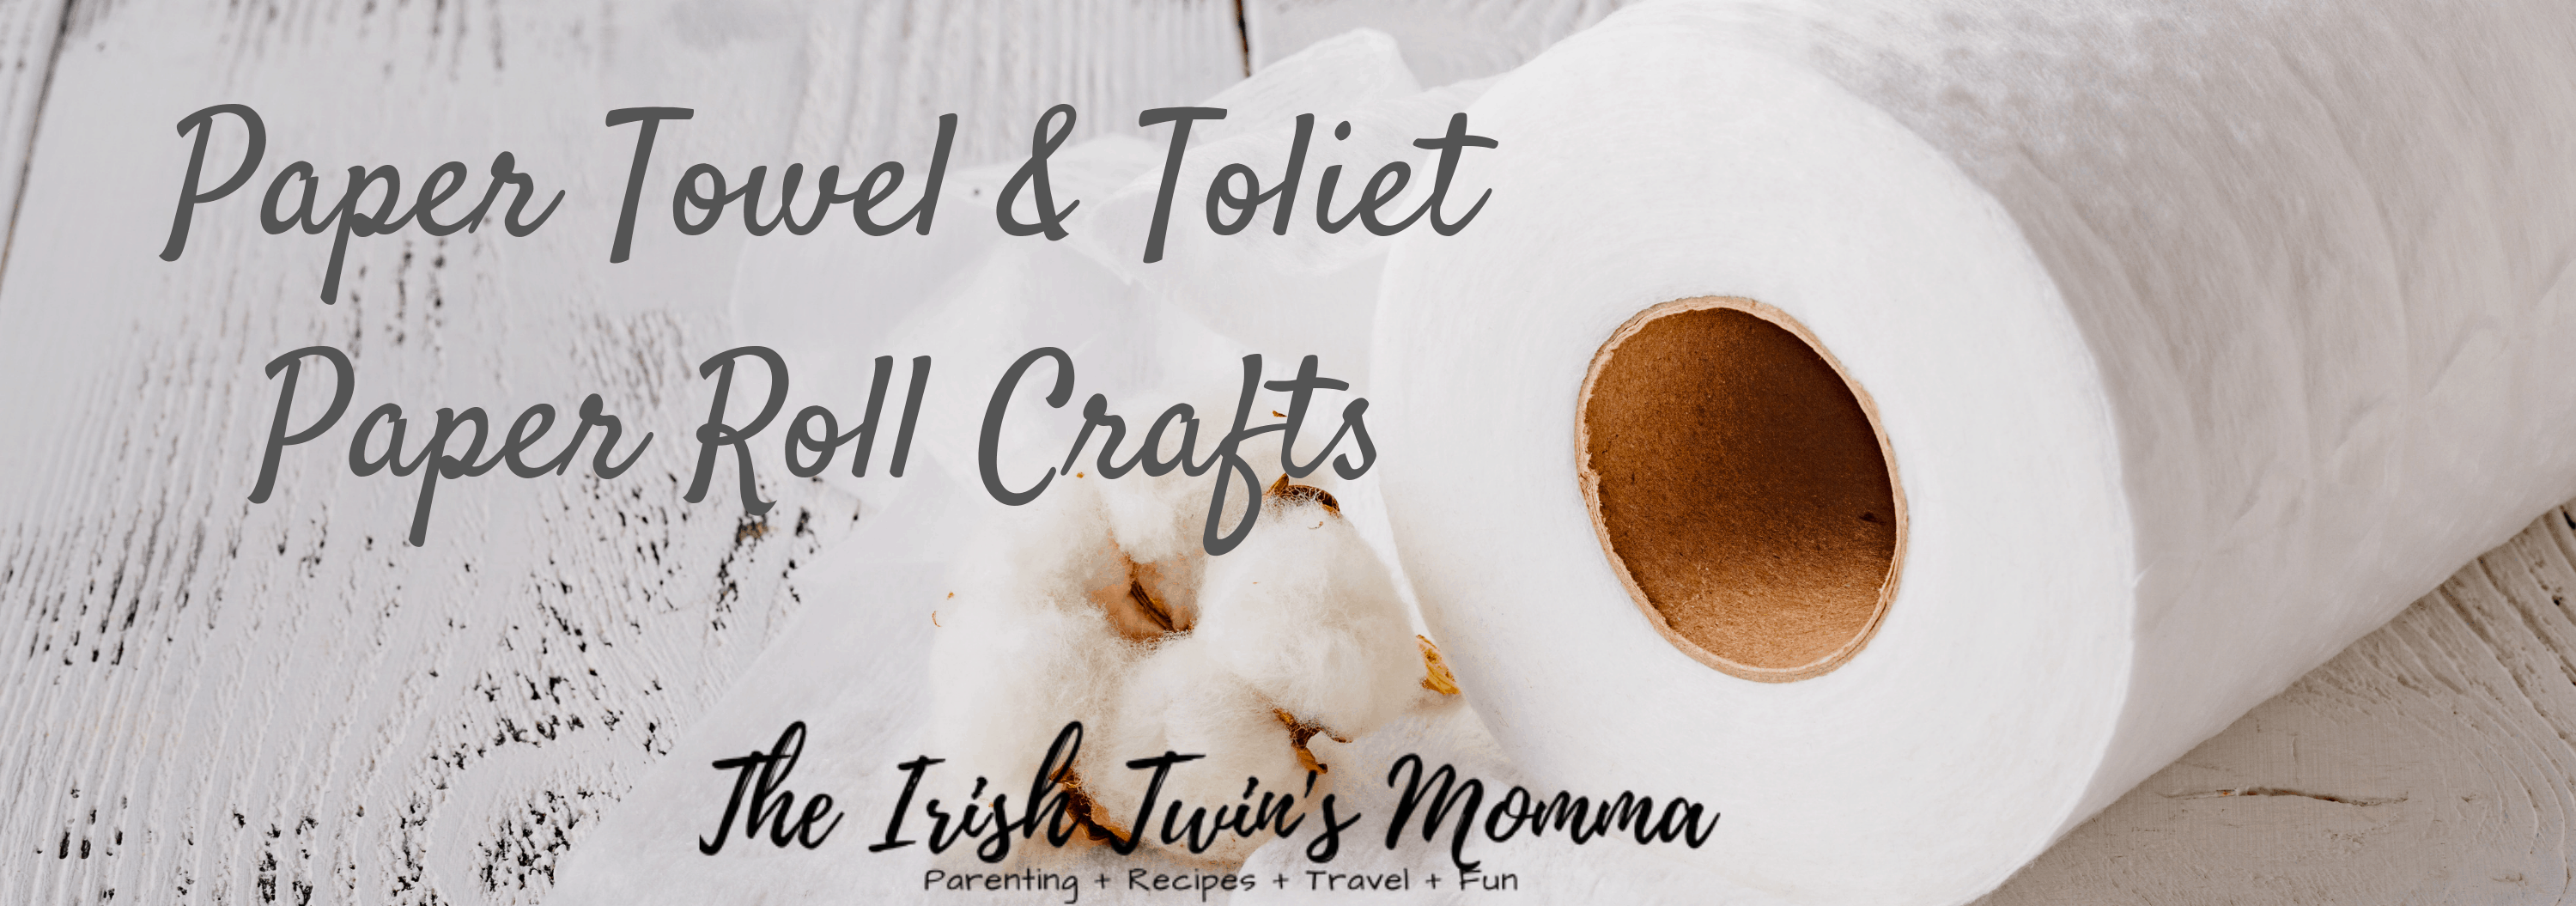 Paper Towel Roll Crafts and Toilet Paper Roll Crafts - The Irish Twins ...